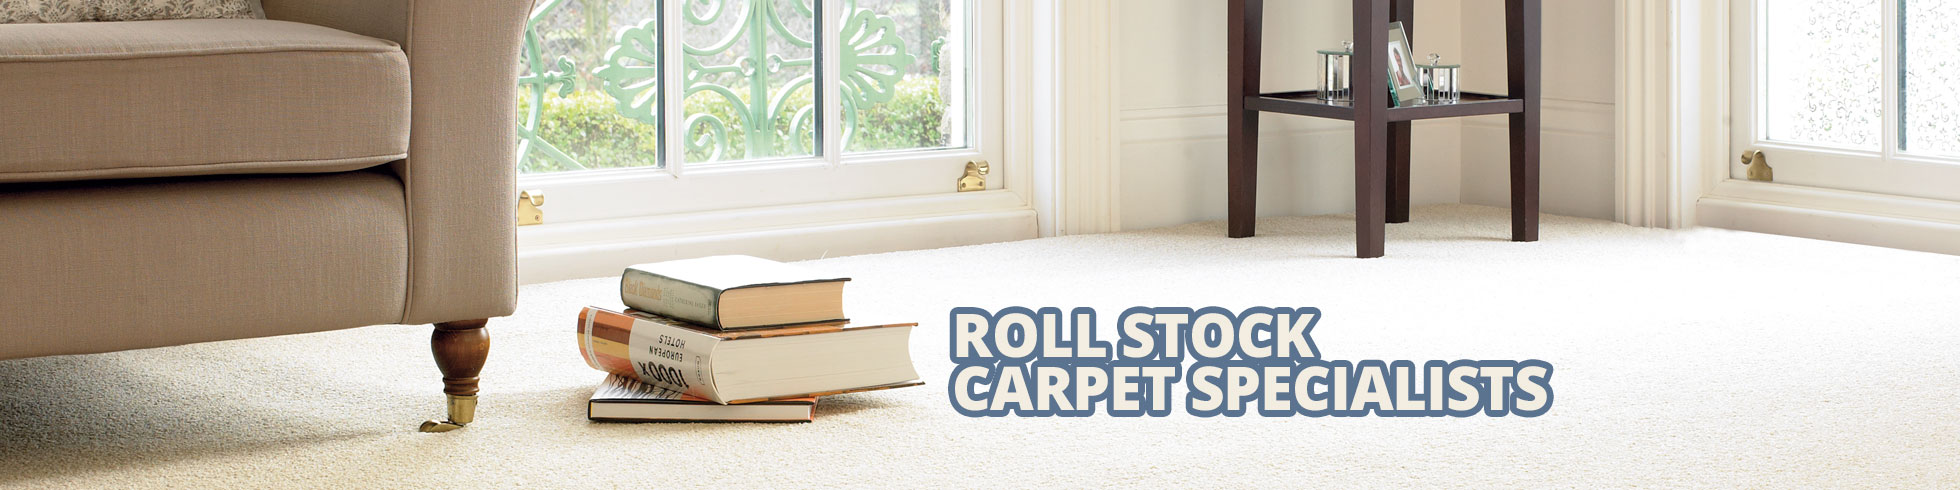 1st choice carpets and flooring wiltshire roll stock carpets